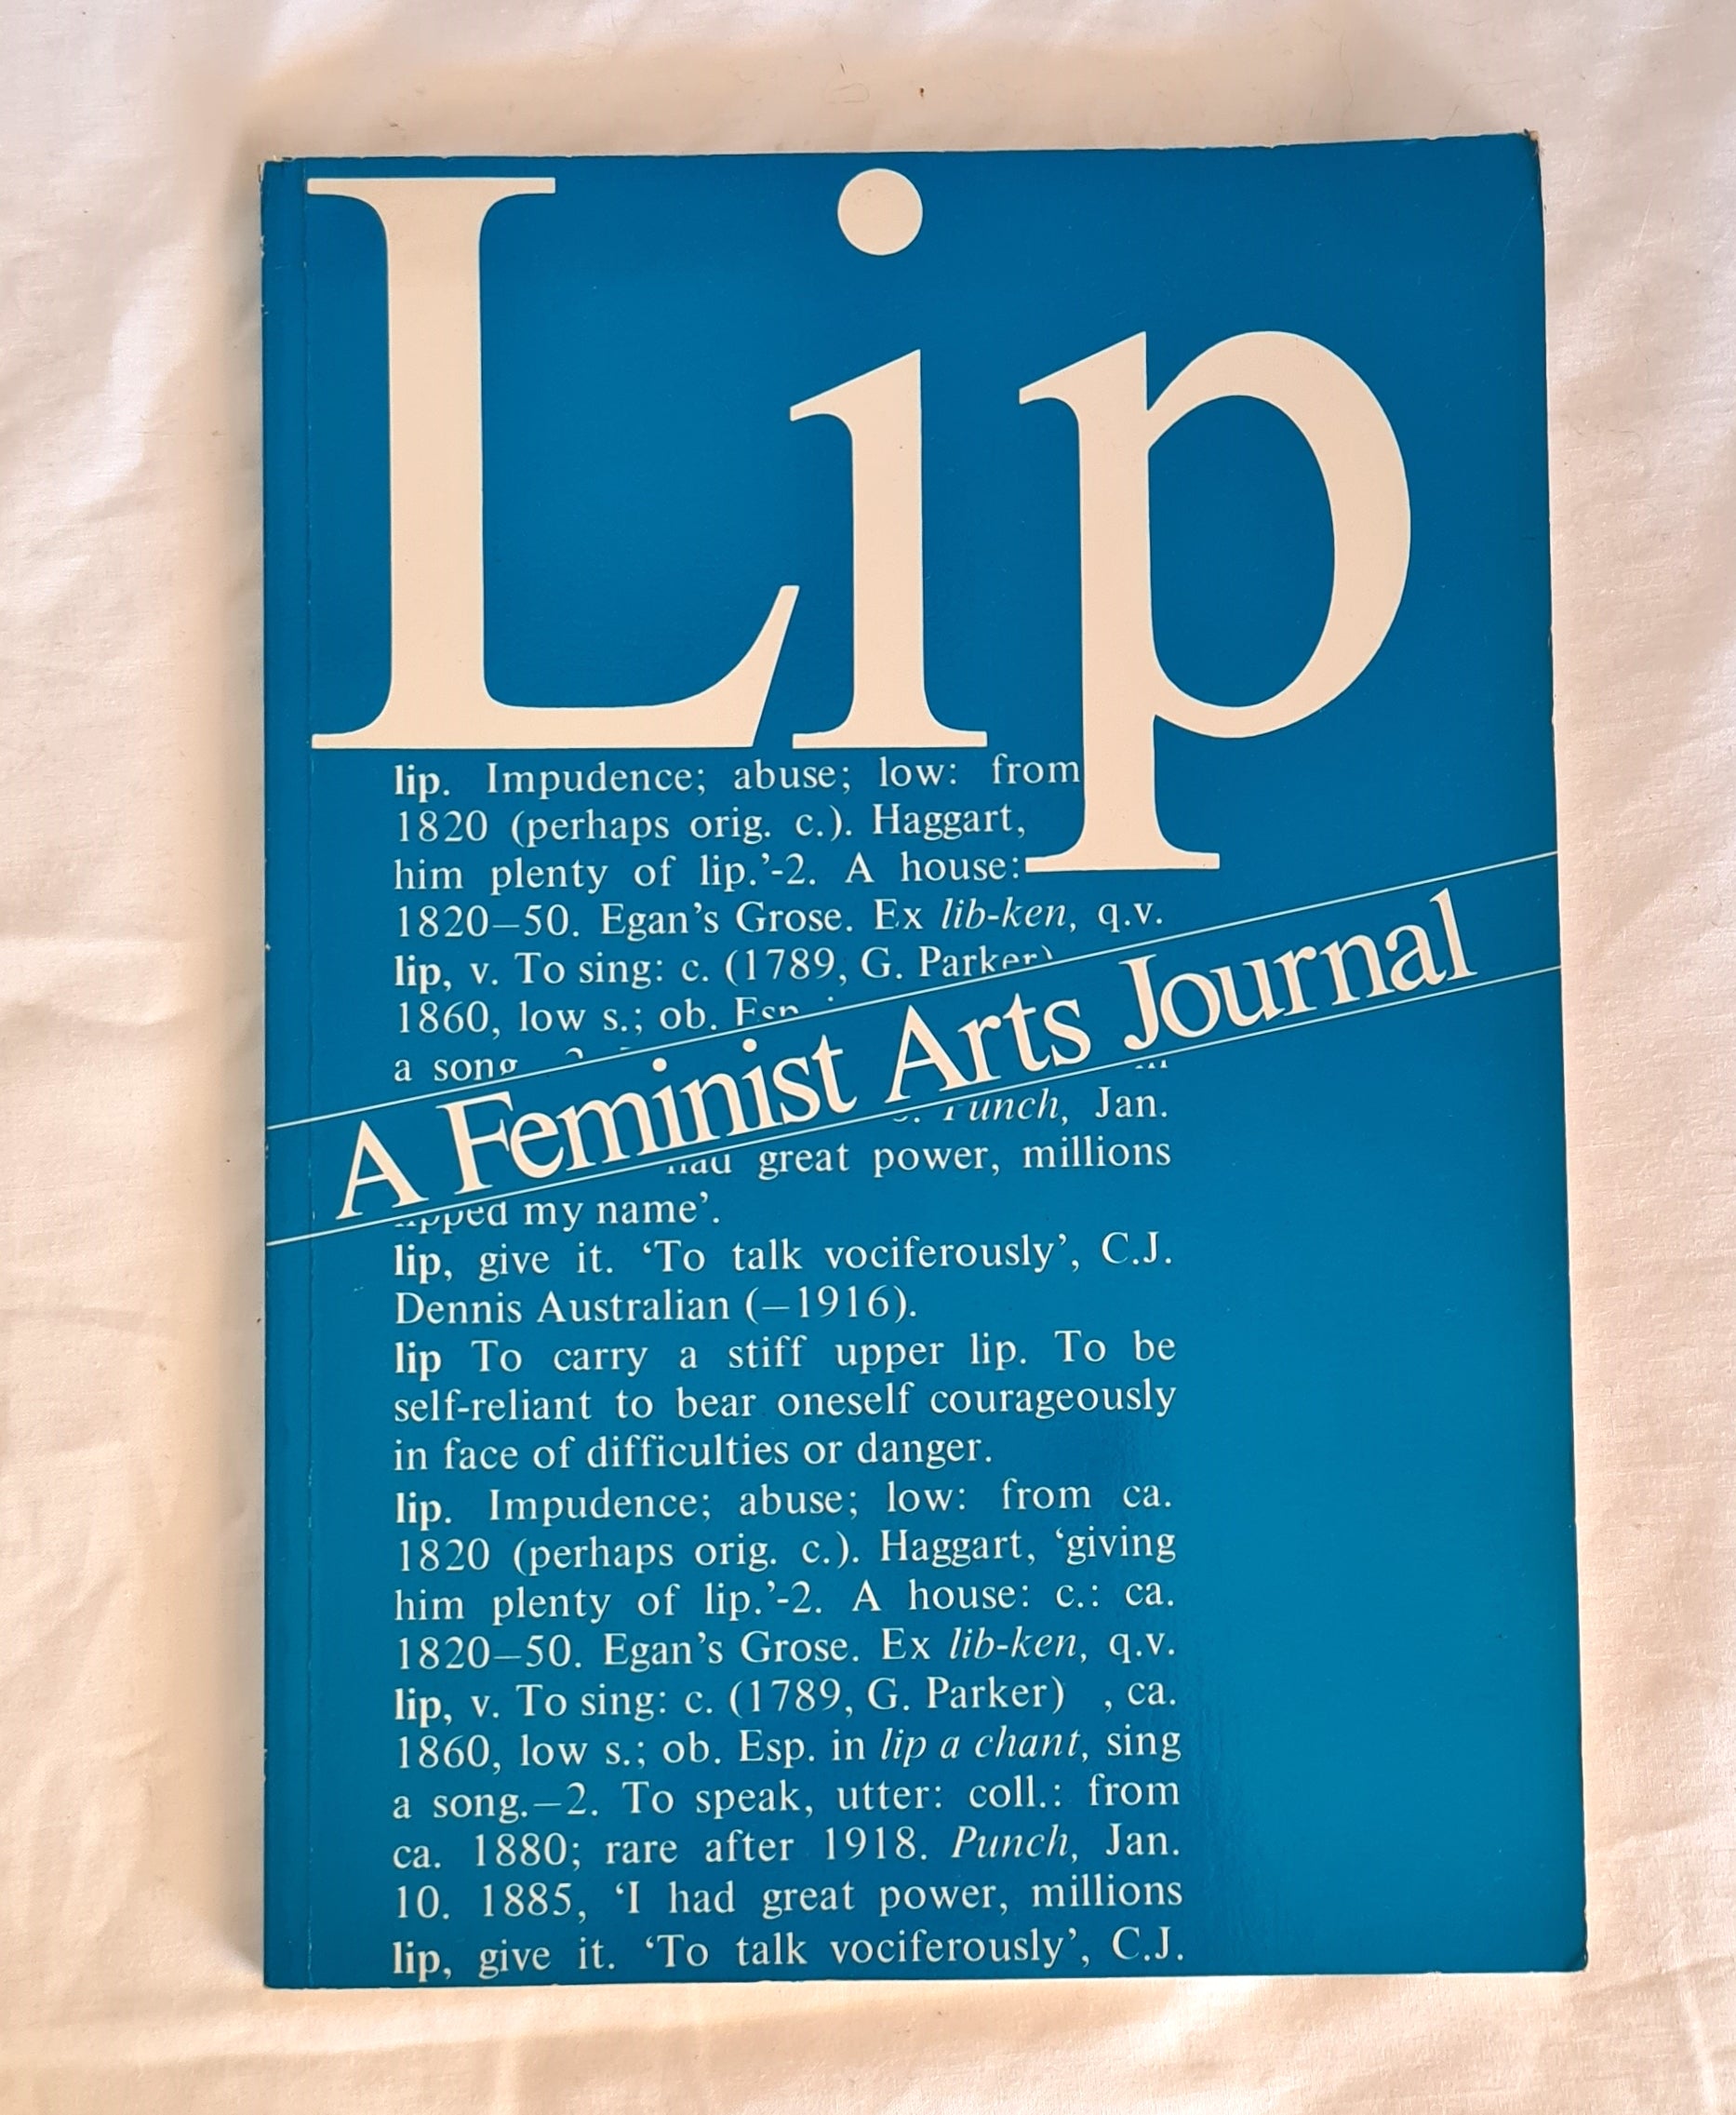 LIP 1982/3  Issue Number 7  A Feminist Arts Journal  A Feminist Journal of Women in the Visual and Performing Arts  Production by Suzanne Davies